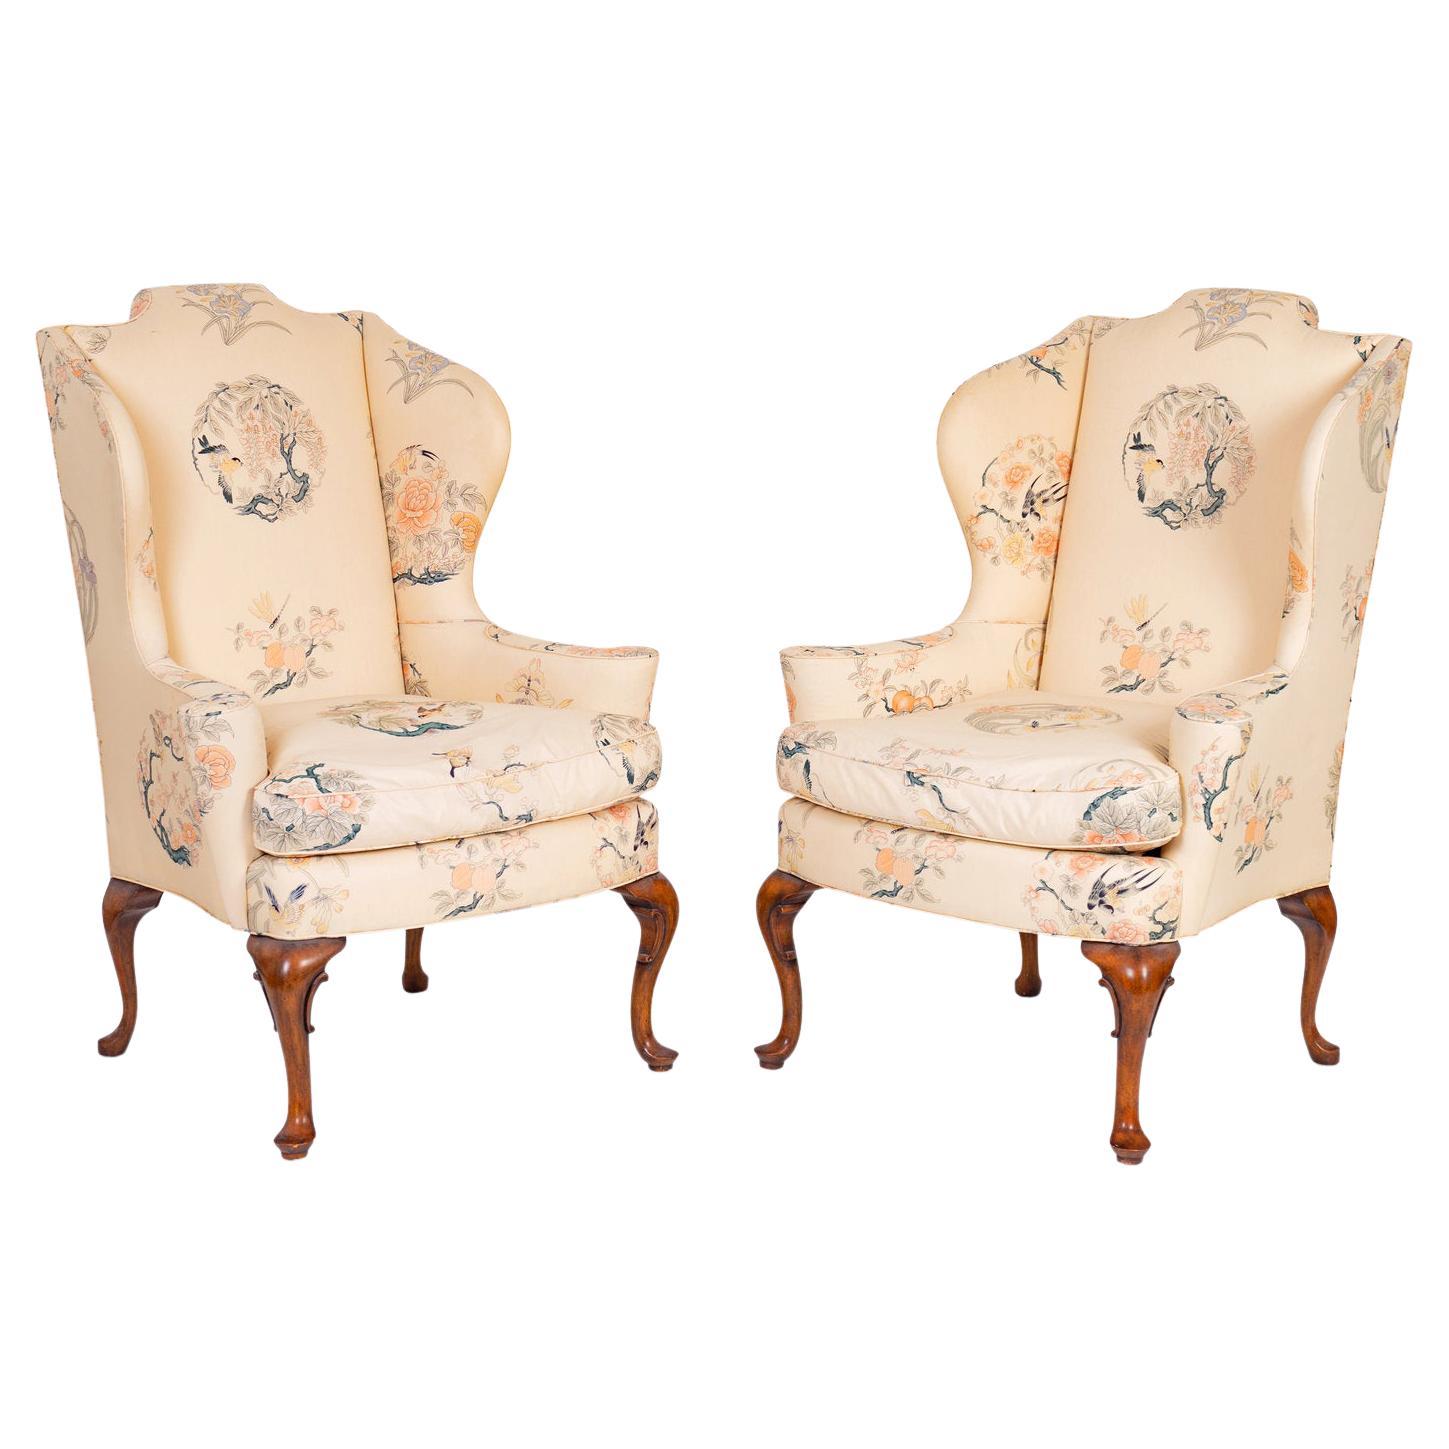 Pair of Queen Anne Style Wingback Chairs Silk Upholstery, 20th Century